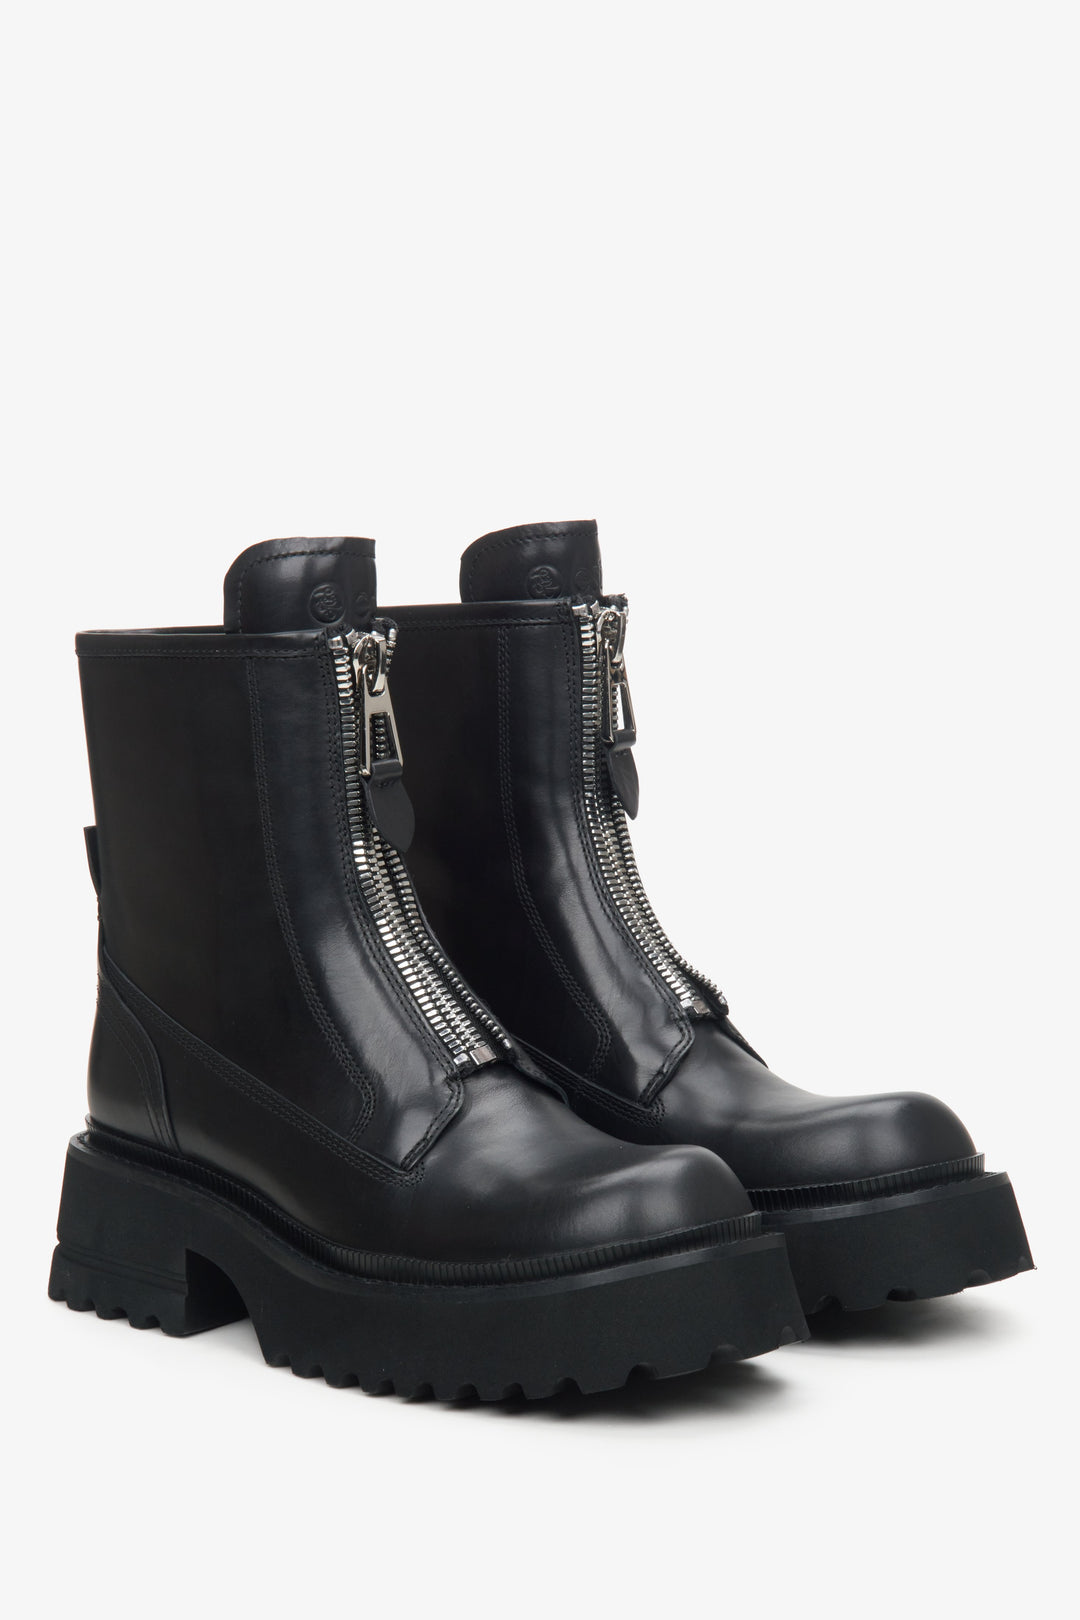 Black leather boots with a decorative zipper by Estro.